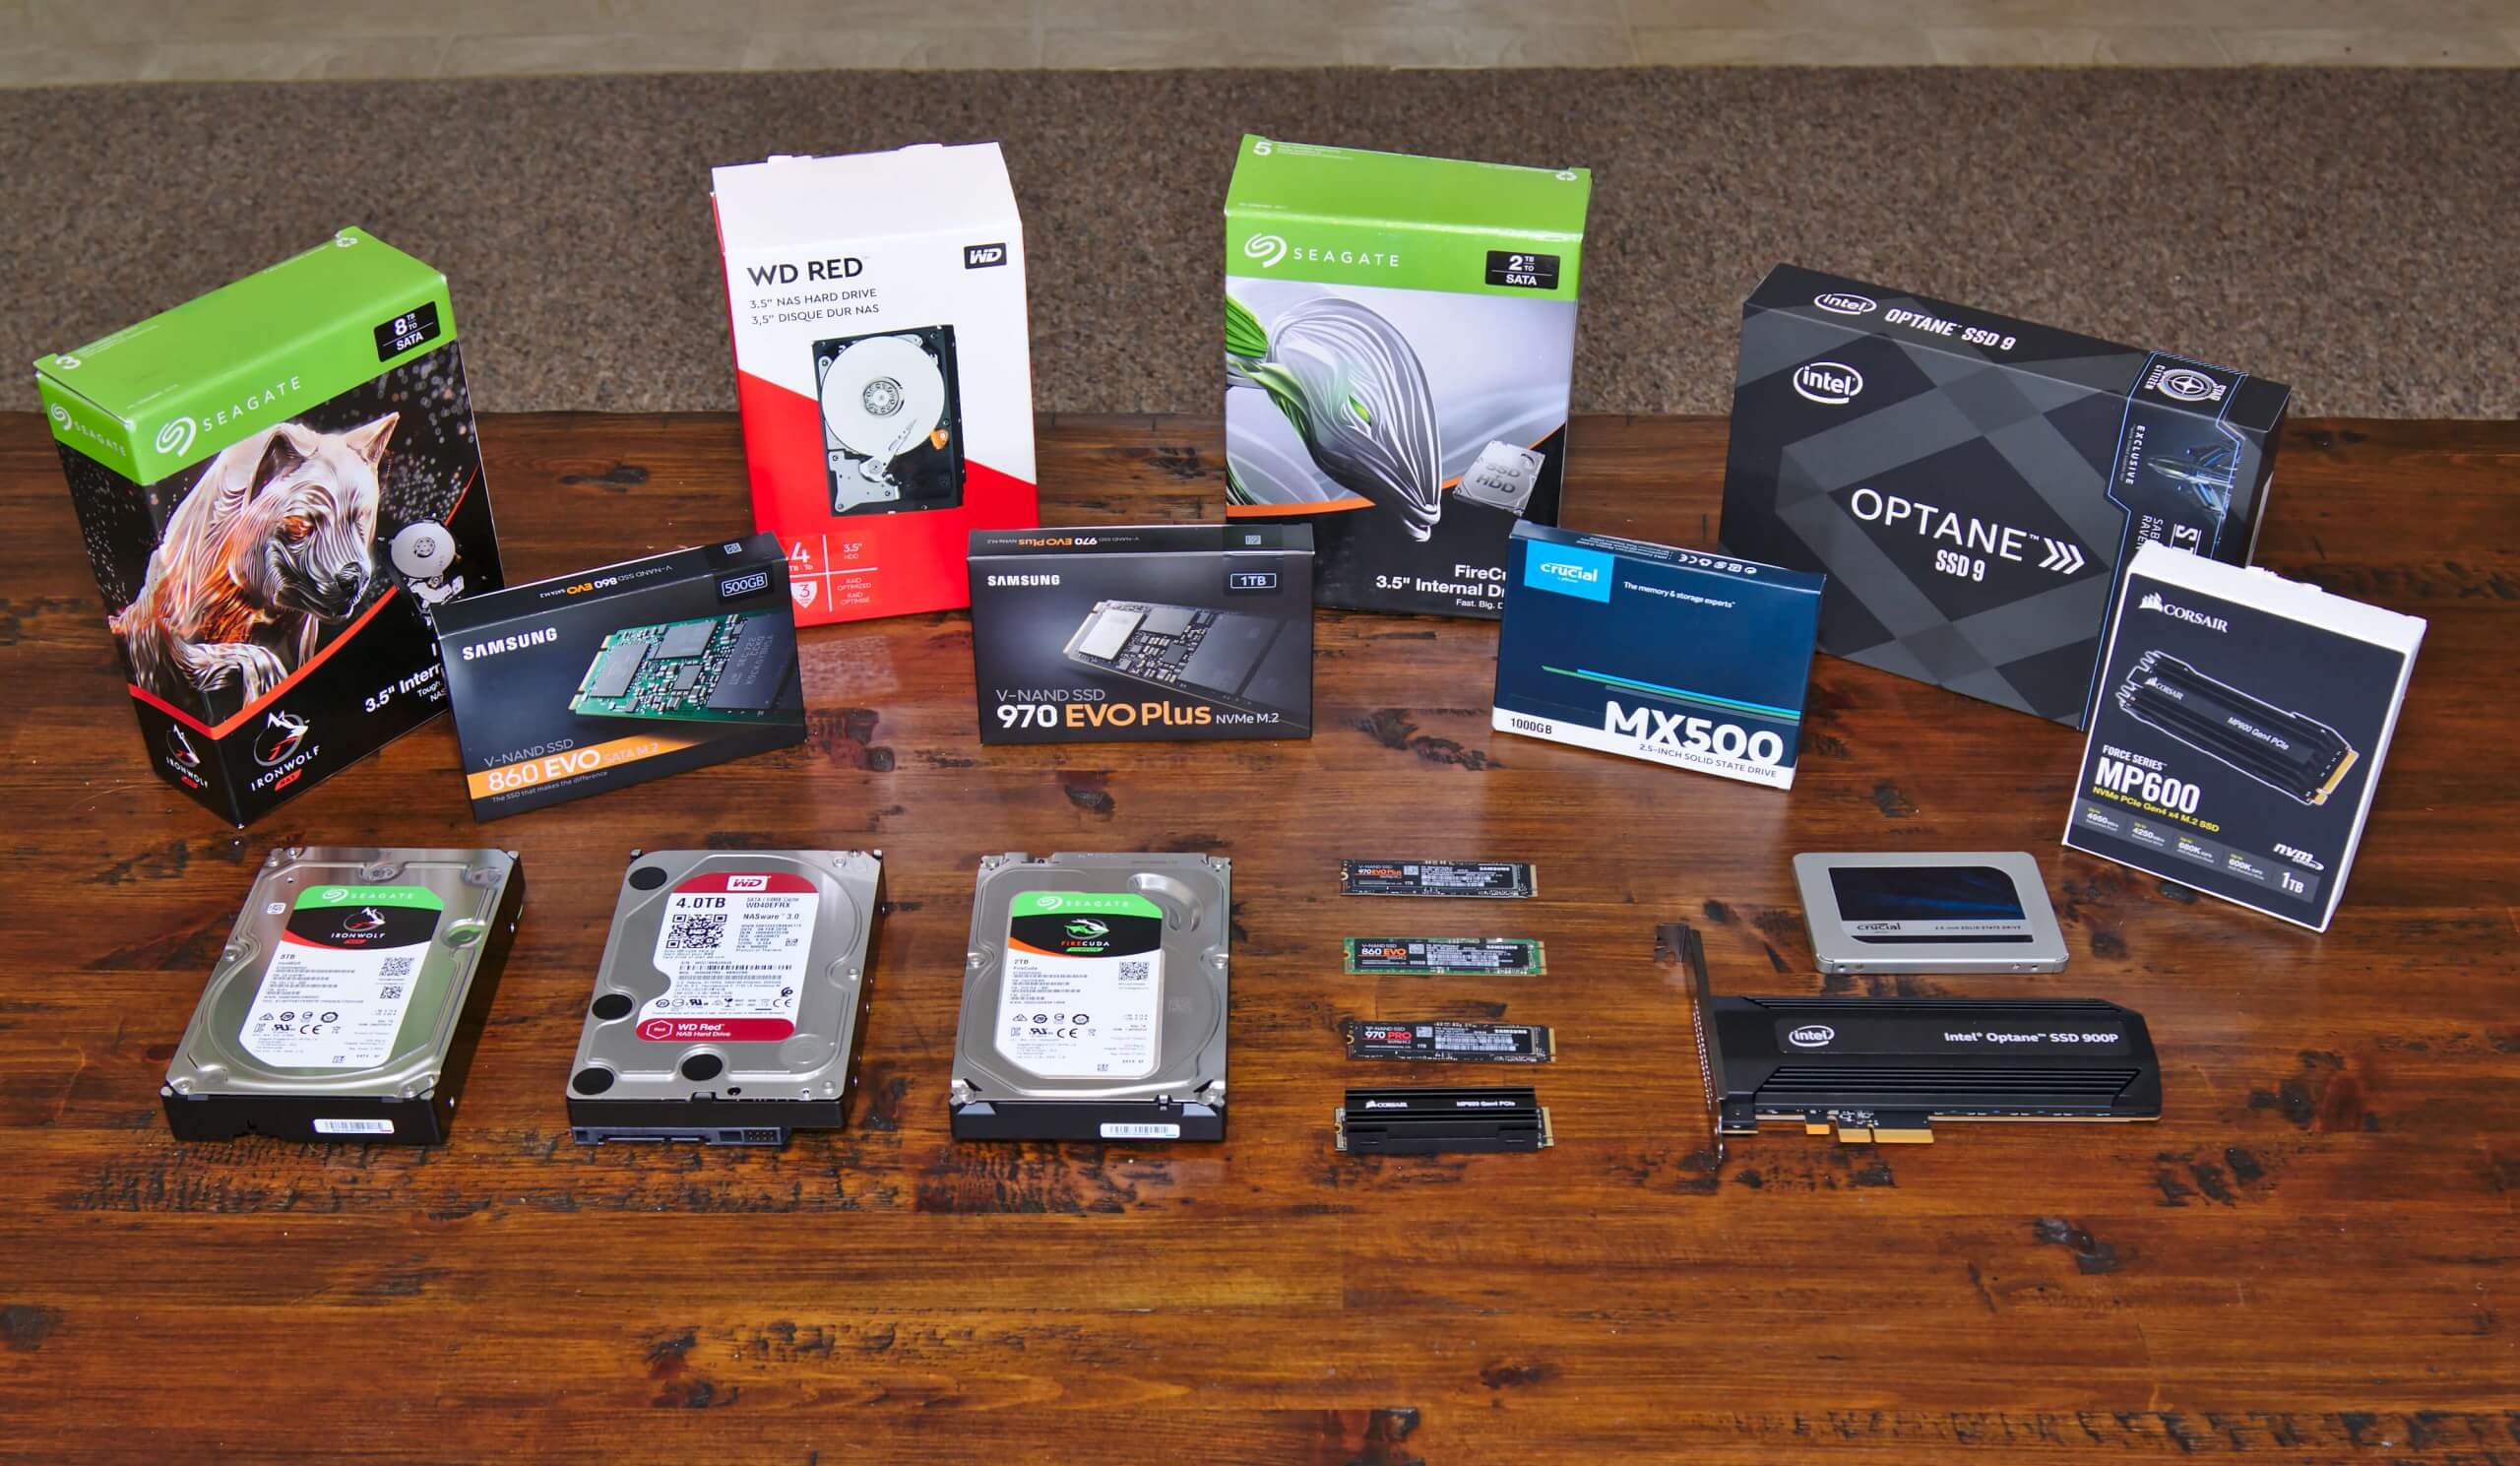 Storage Performance Roundup: Mechanical Disk Drives to PCIe 4.0 SSDs and Everything In Between |